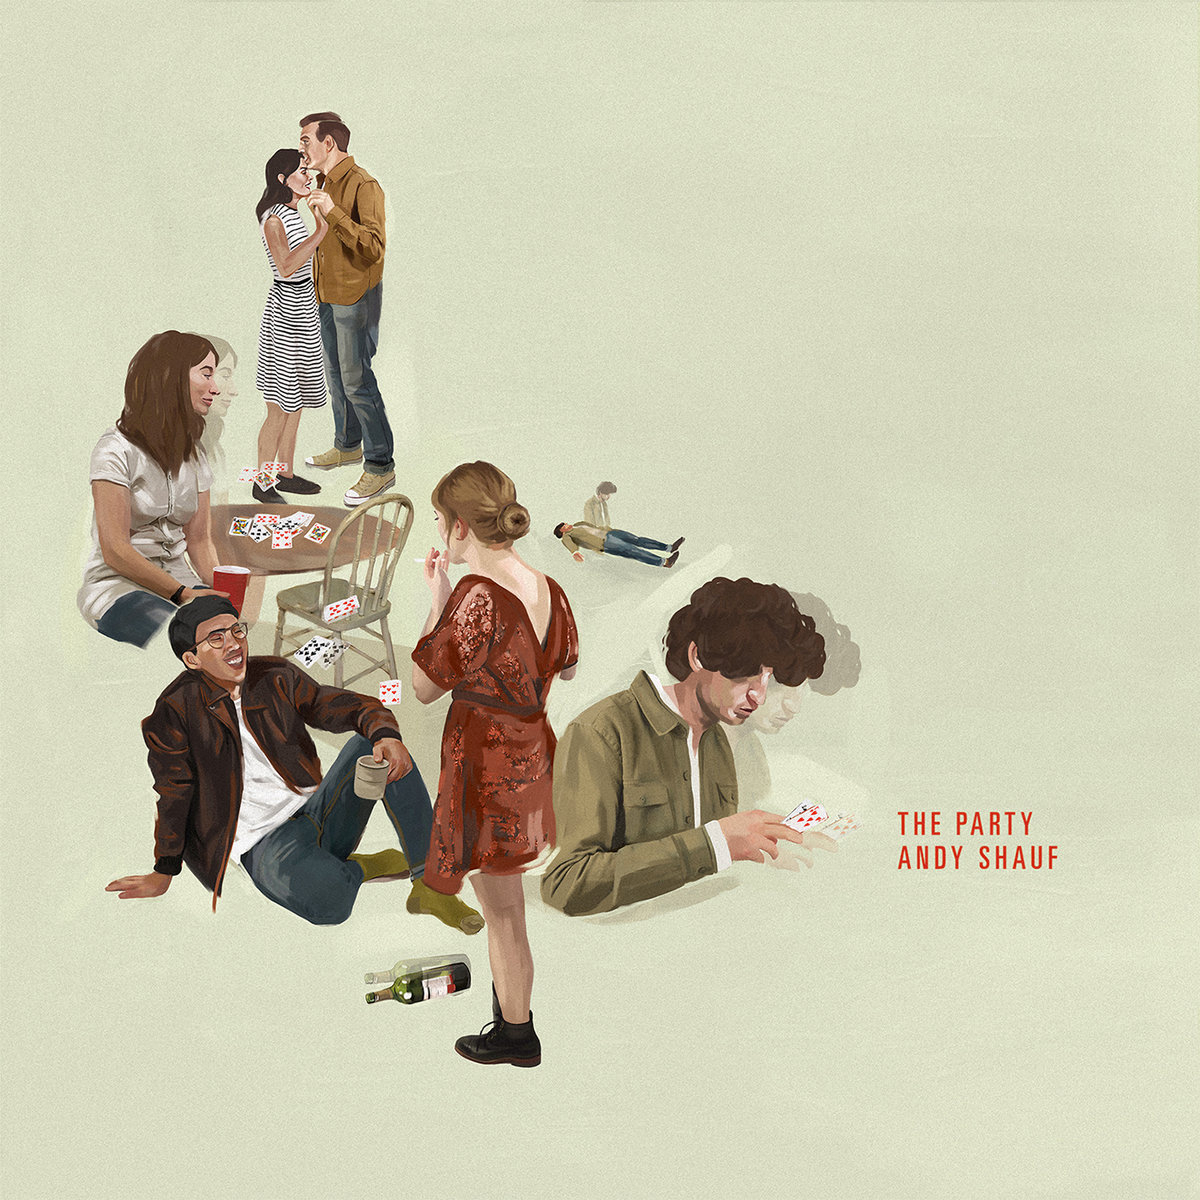 Official album artwork of "The Party" by Andy Shauf.
